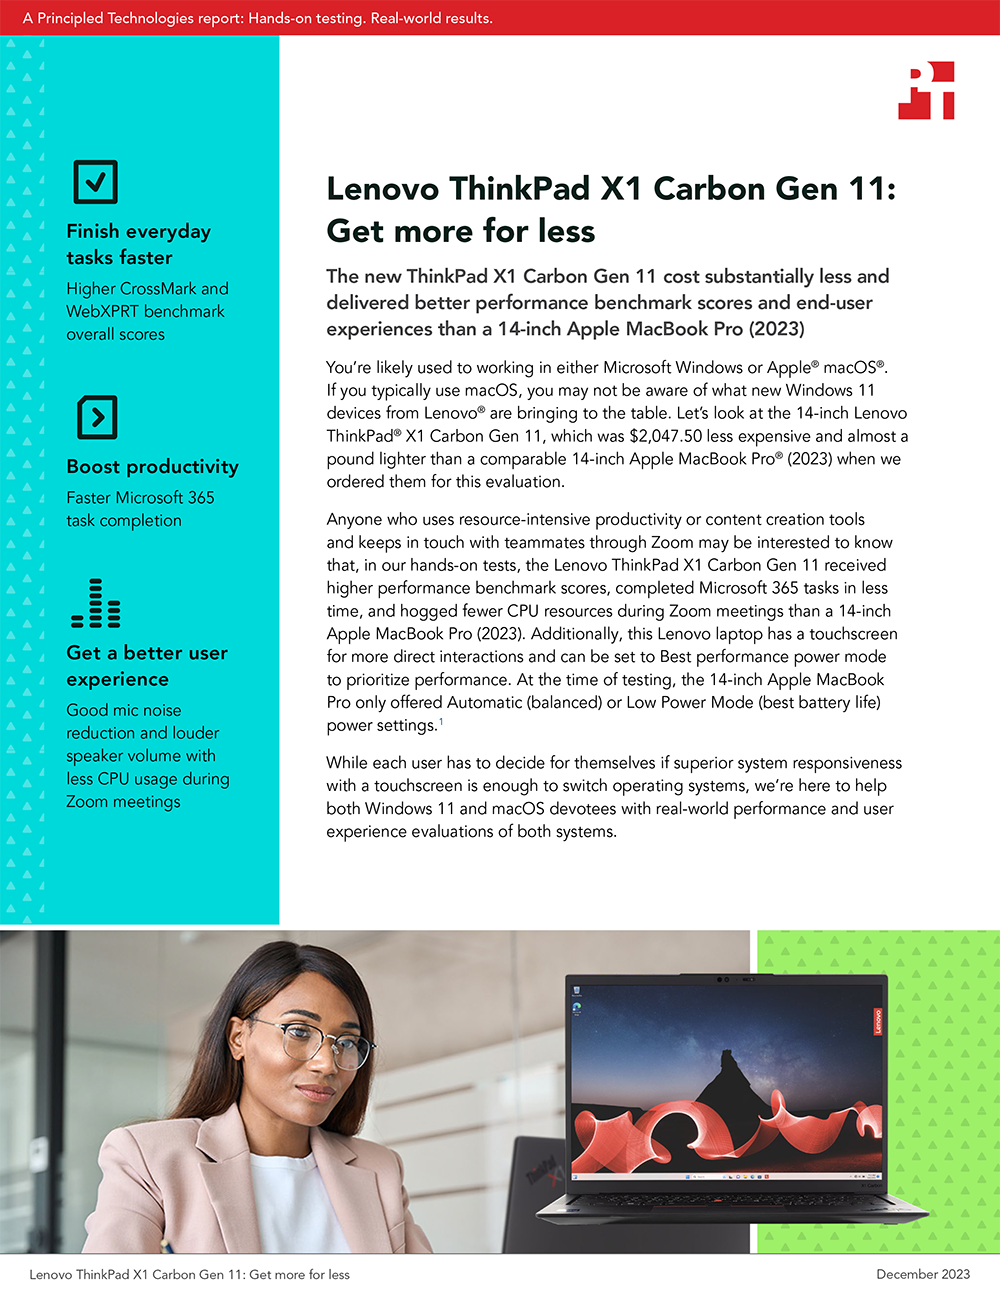  Lenovo ThinkPad X1 Carbon Gen 11: Get more for less